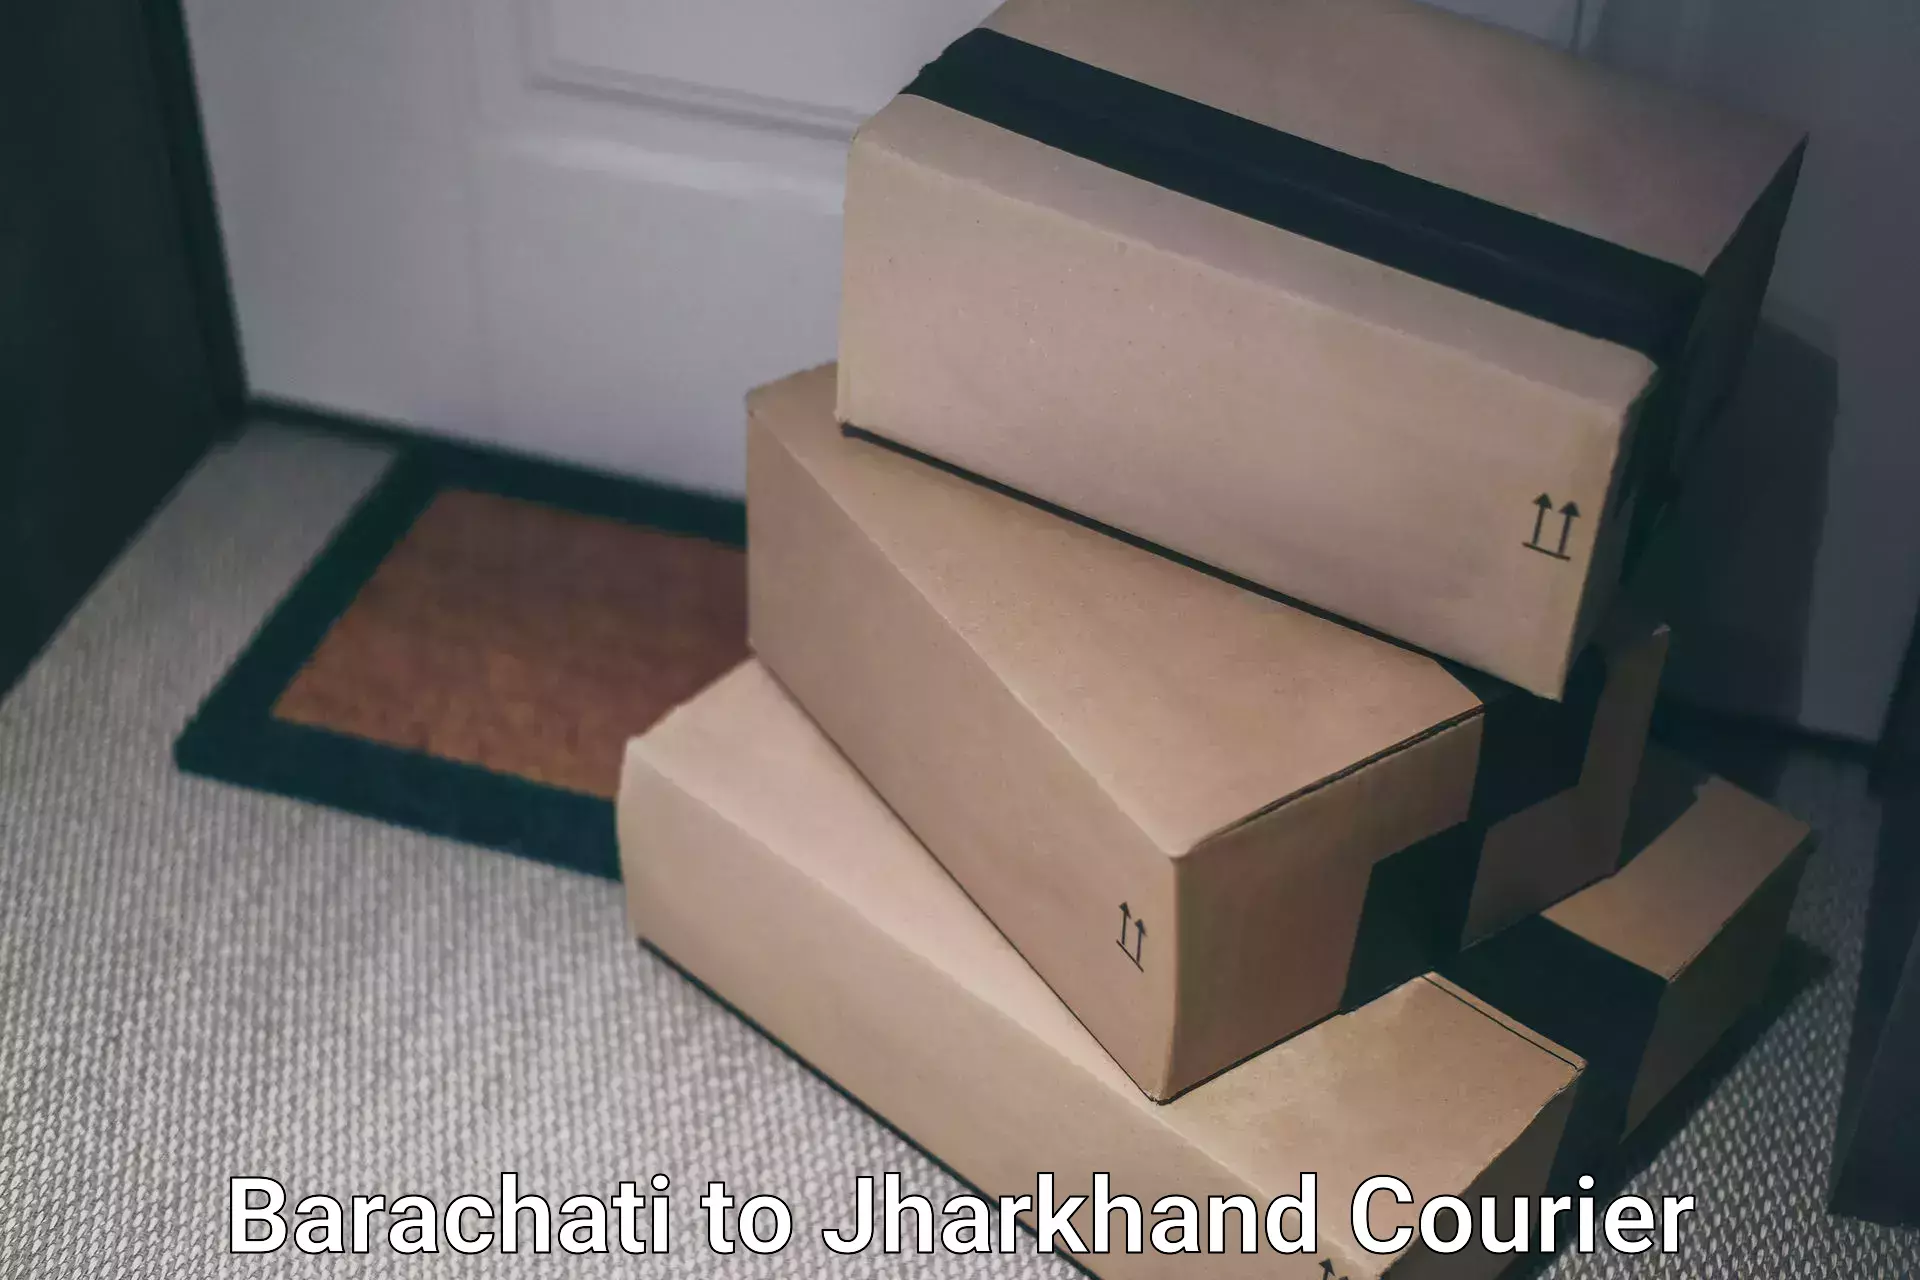 Package delivery network Barachati to Jharkhand